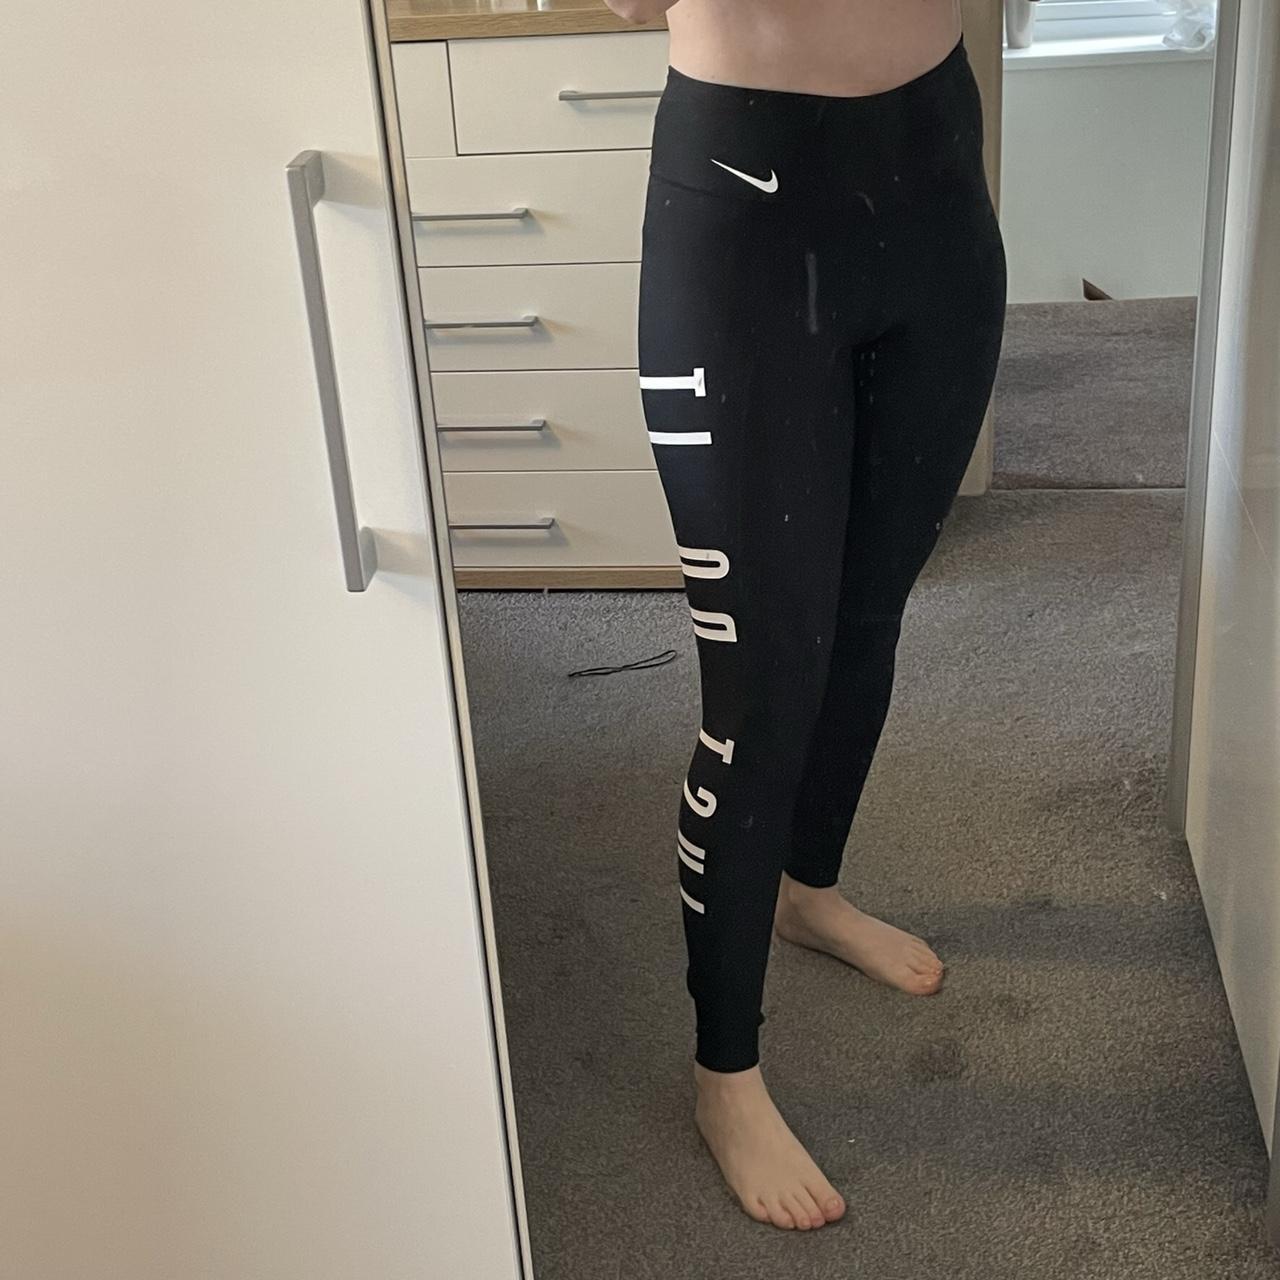 Black nike leggings🤍 size small would be able to fit - Depop